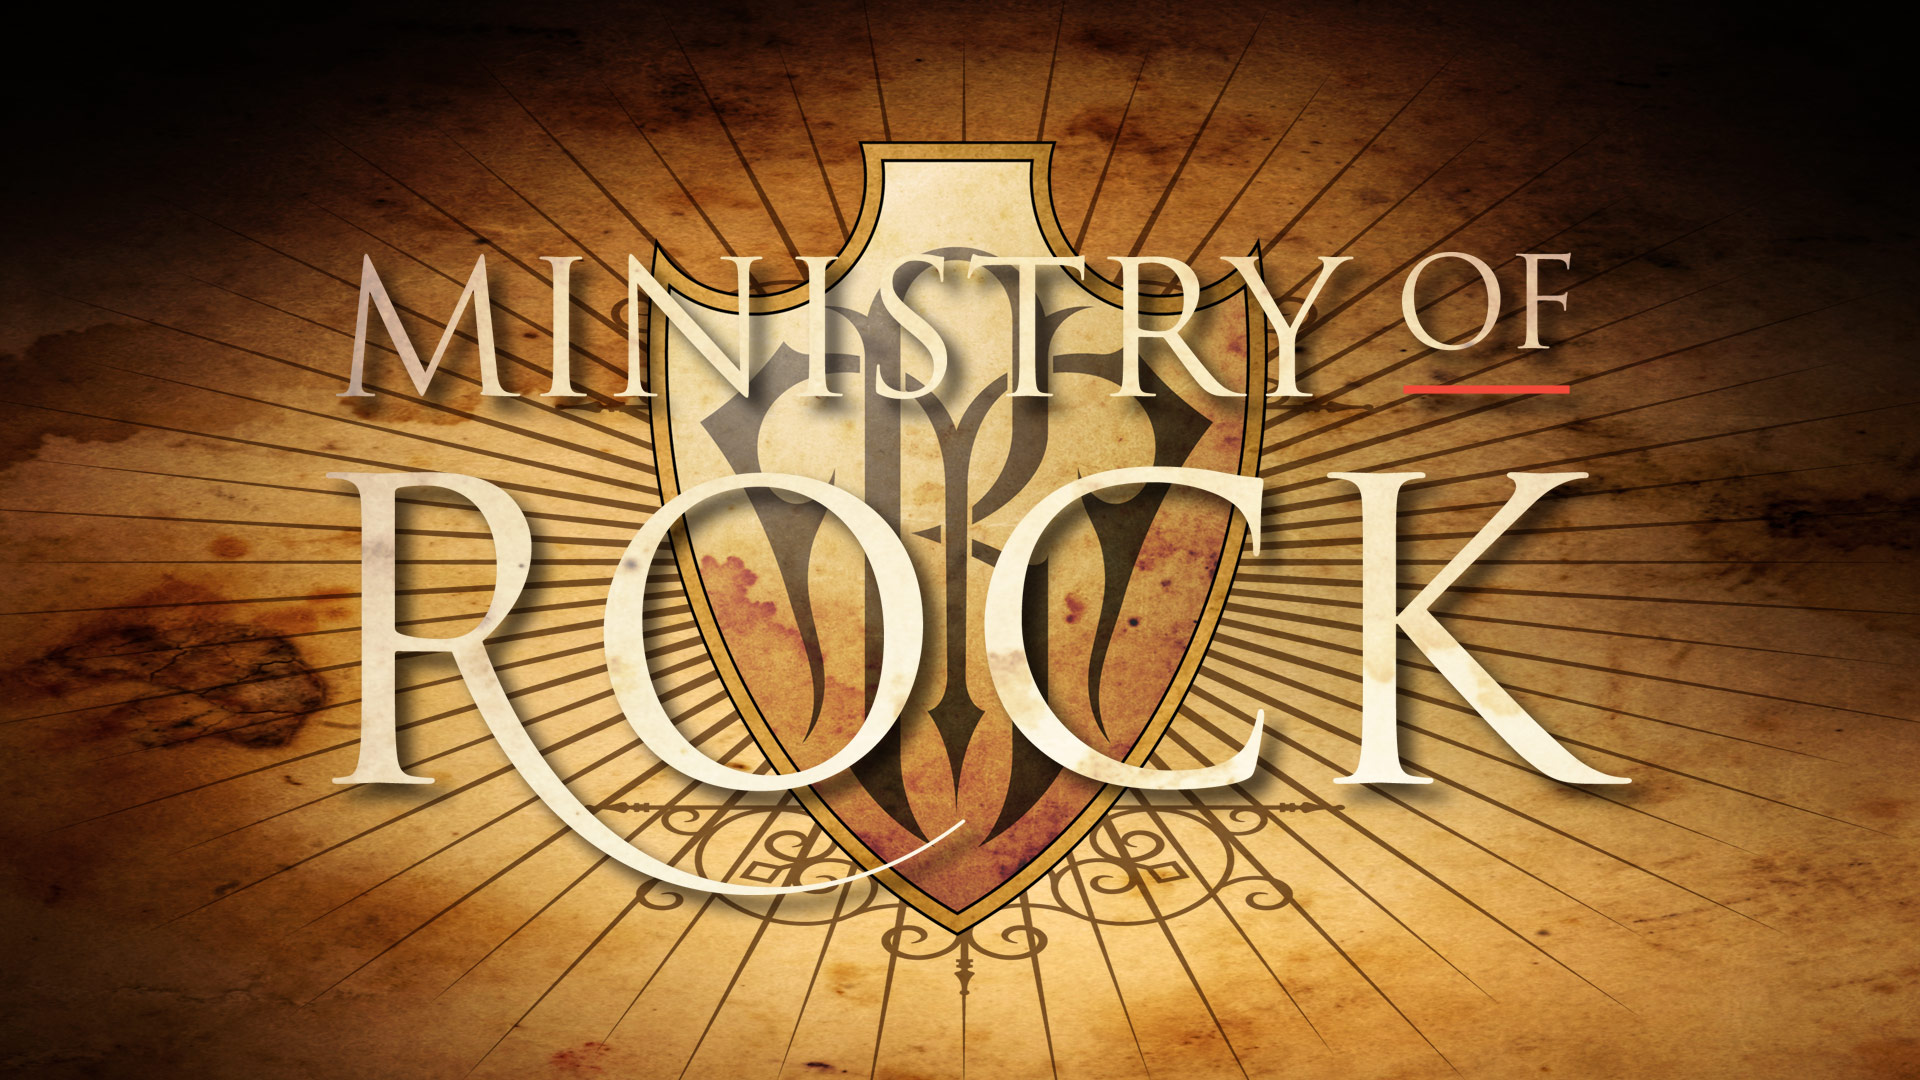 Ministry of Rock